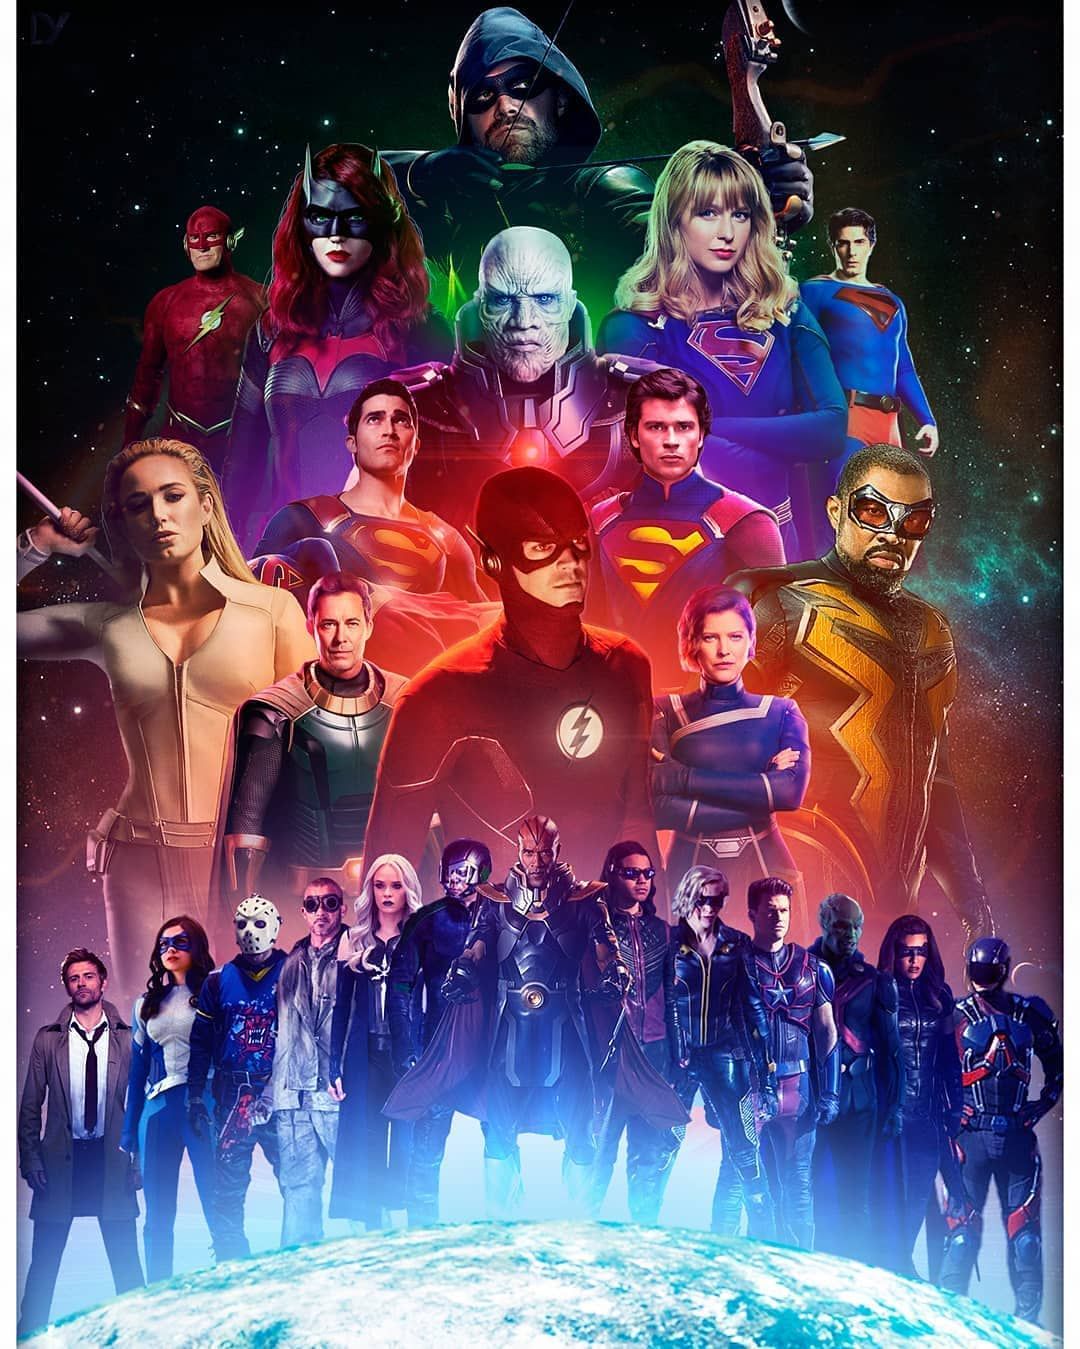 sudumal_Arrowverse page on Instagram: “better than the cw's official poster, What a marvelous Crisis on i. Infinite earths, Dc comics wallpaper, Flash wallpaper